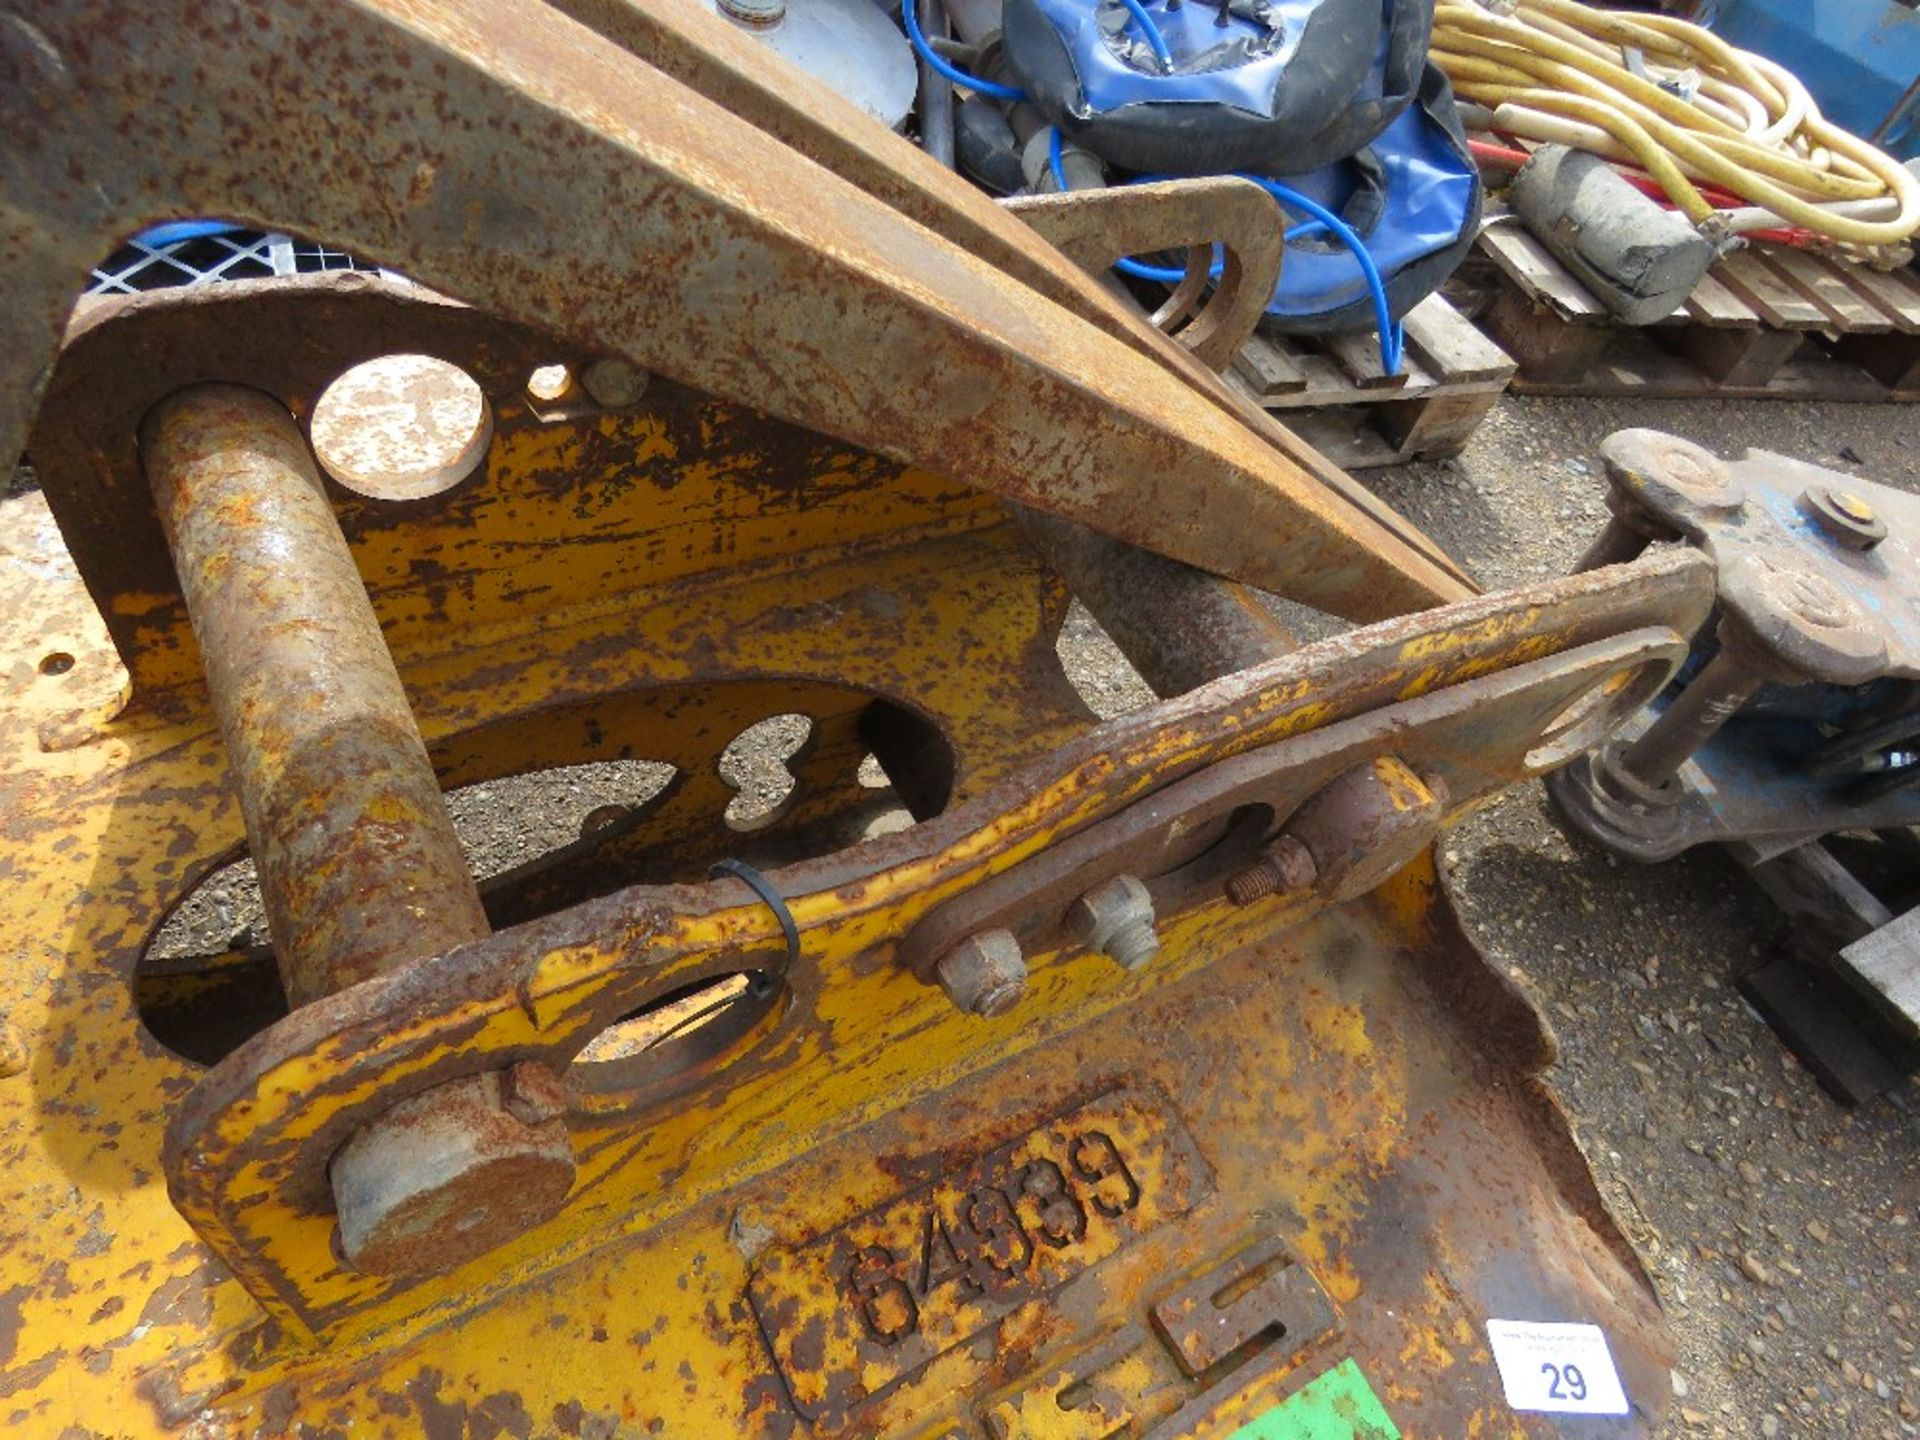 SET OF EXCAVATOR MOUNTED PALLET FORKS, 65MM PINS FITTED. - Image 2 of 5